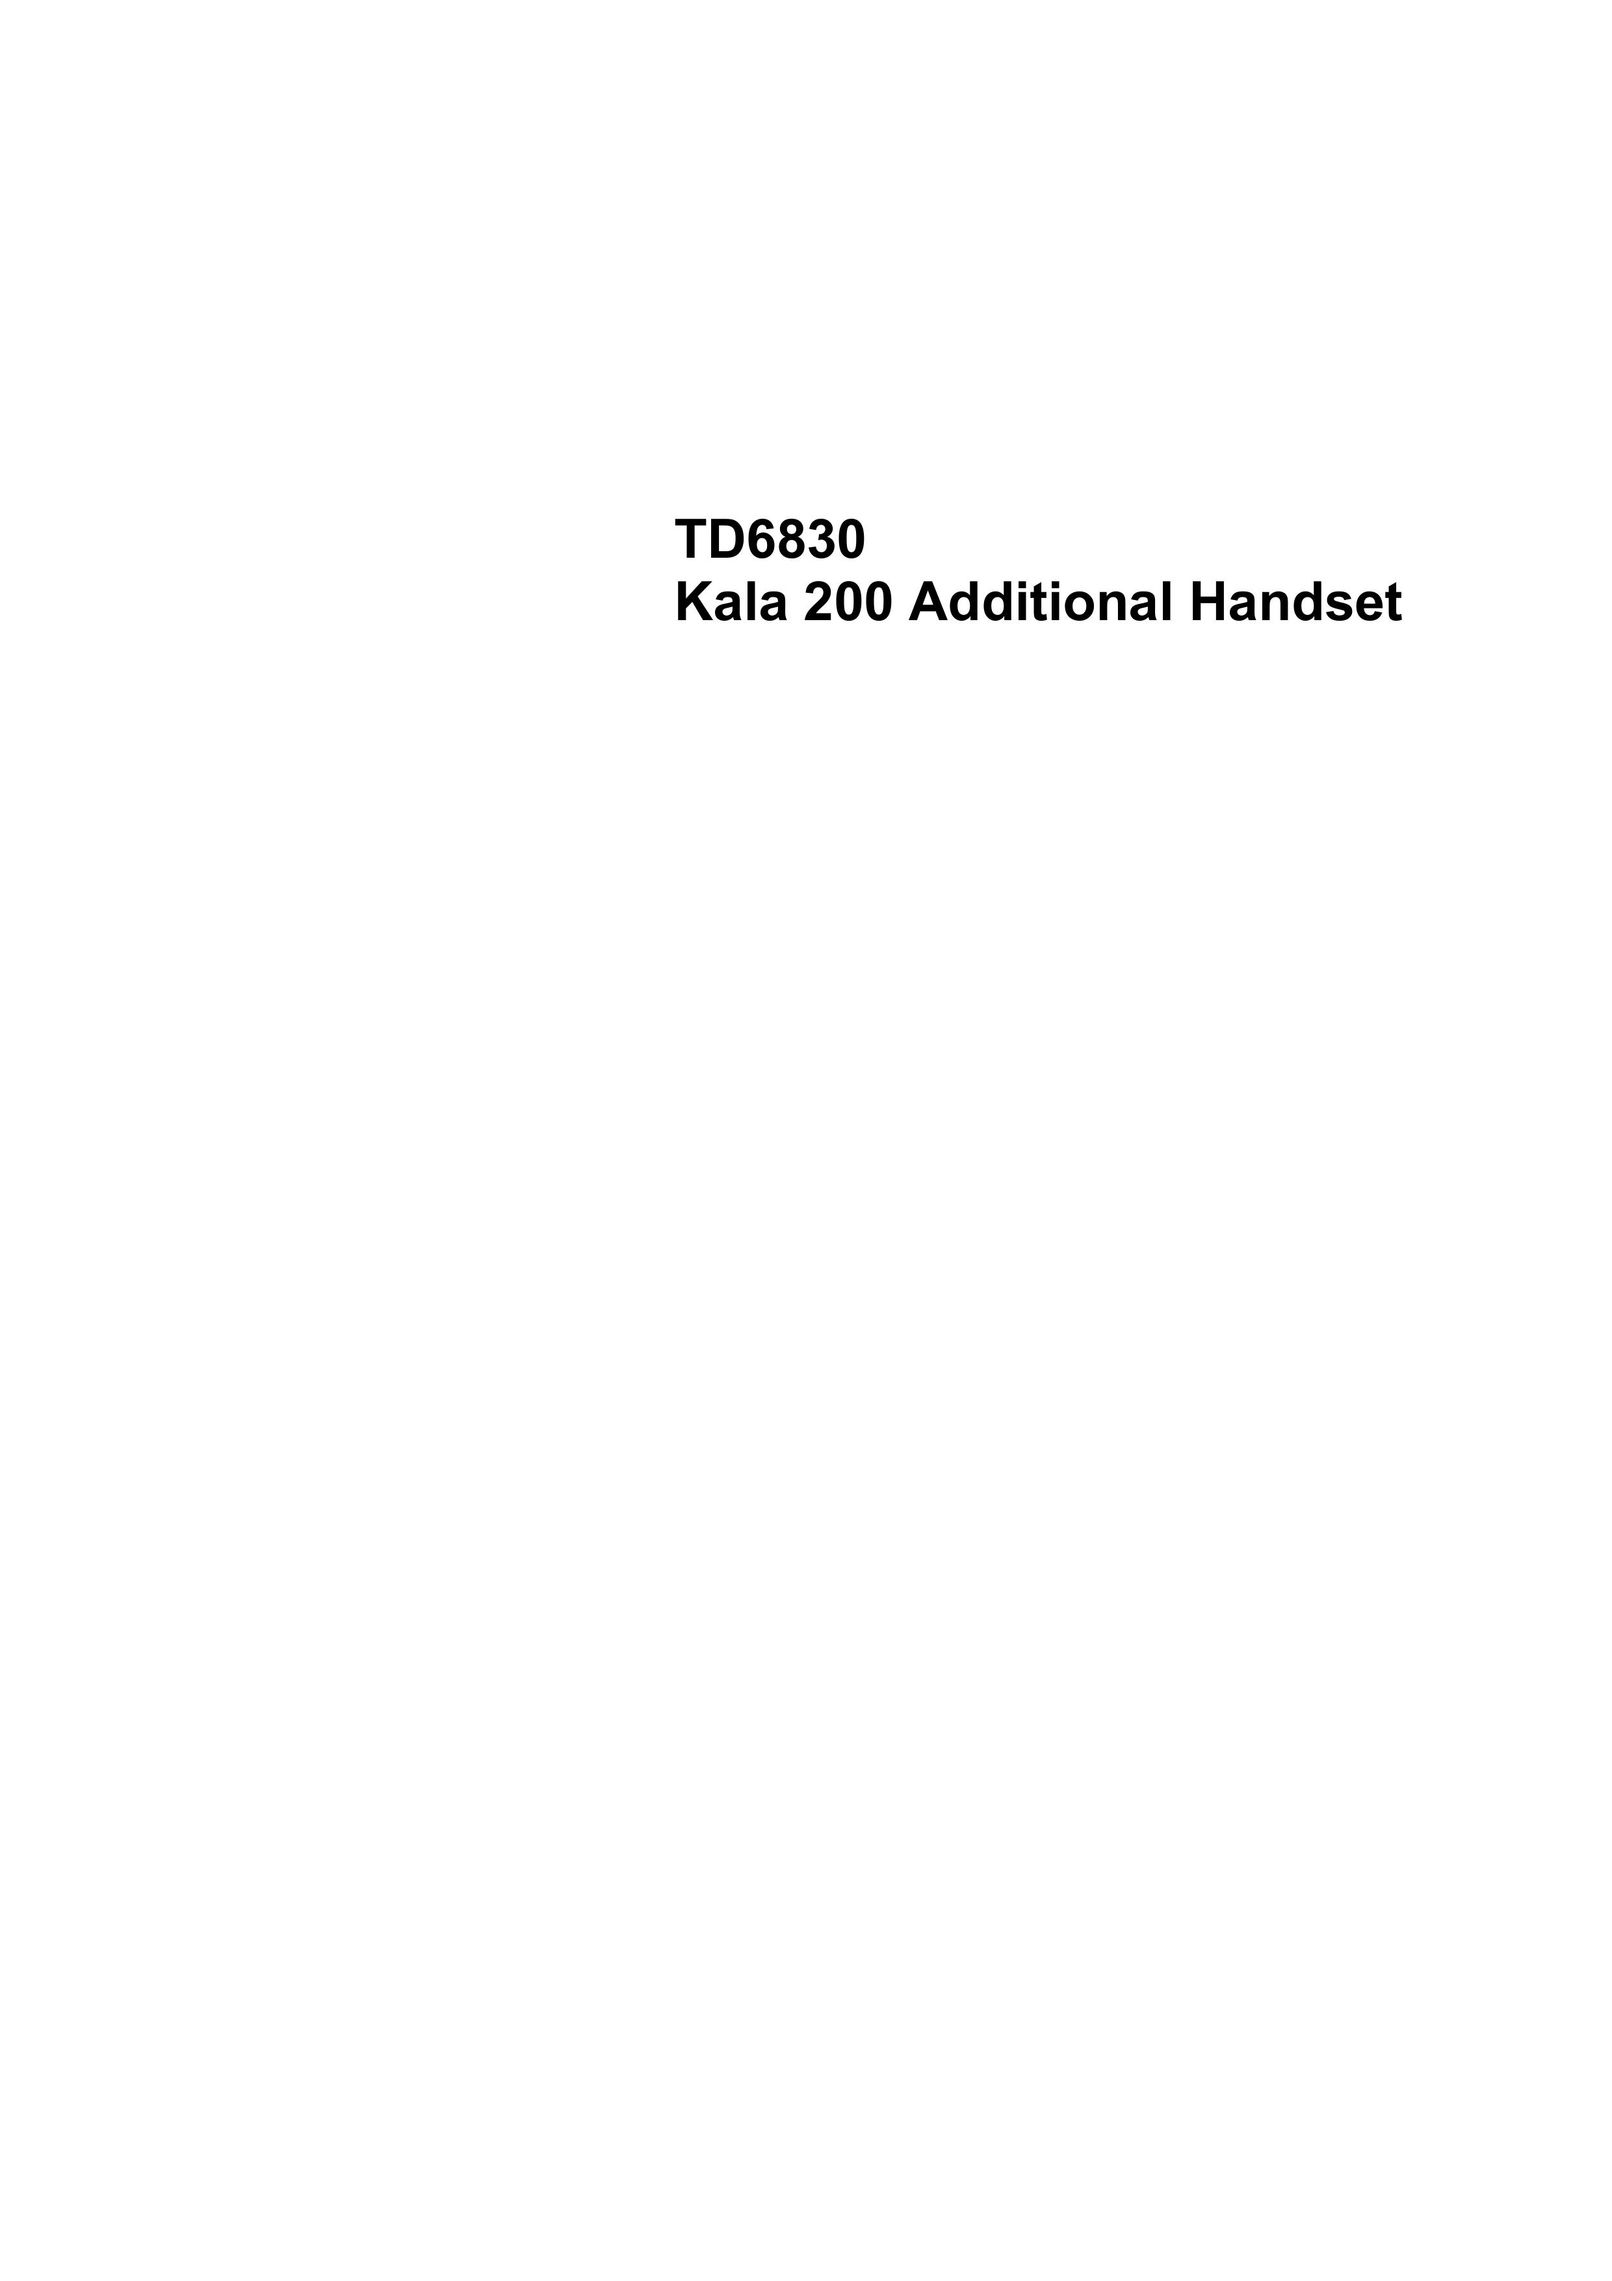 Philips TD6830 Corded Headset User Manual